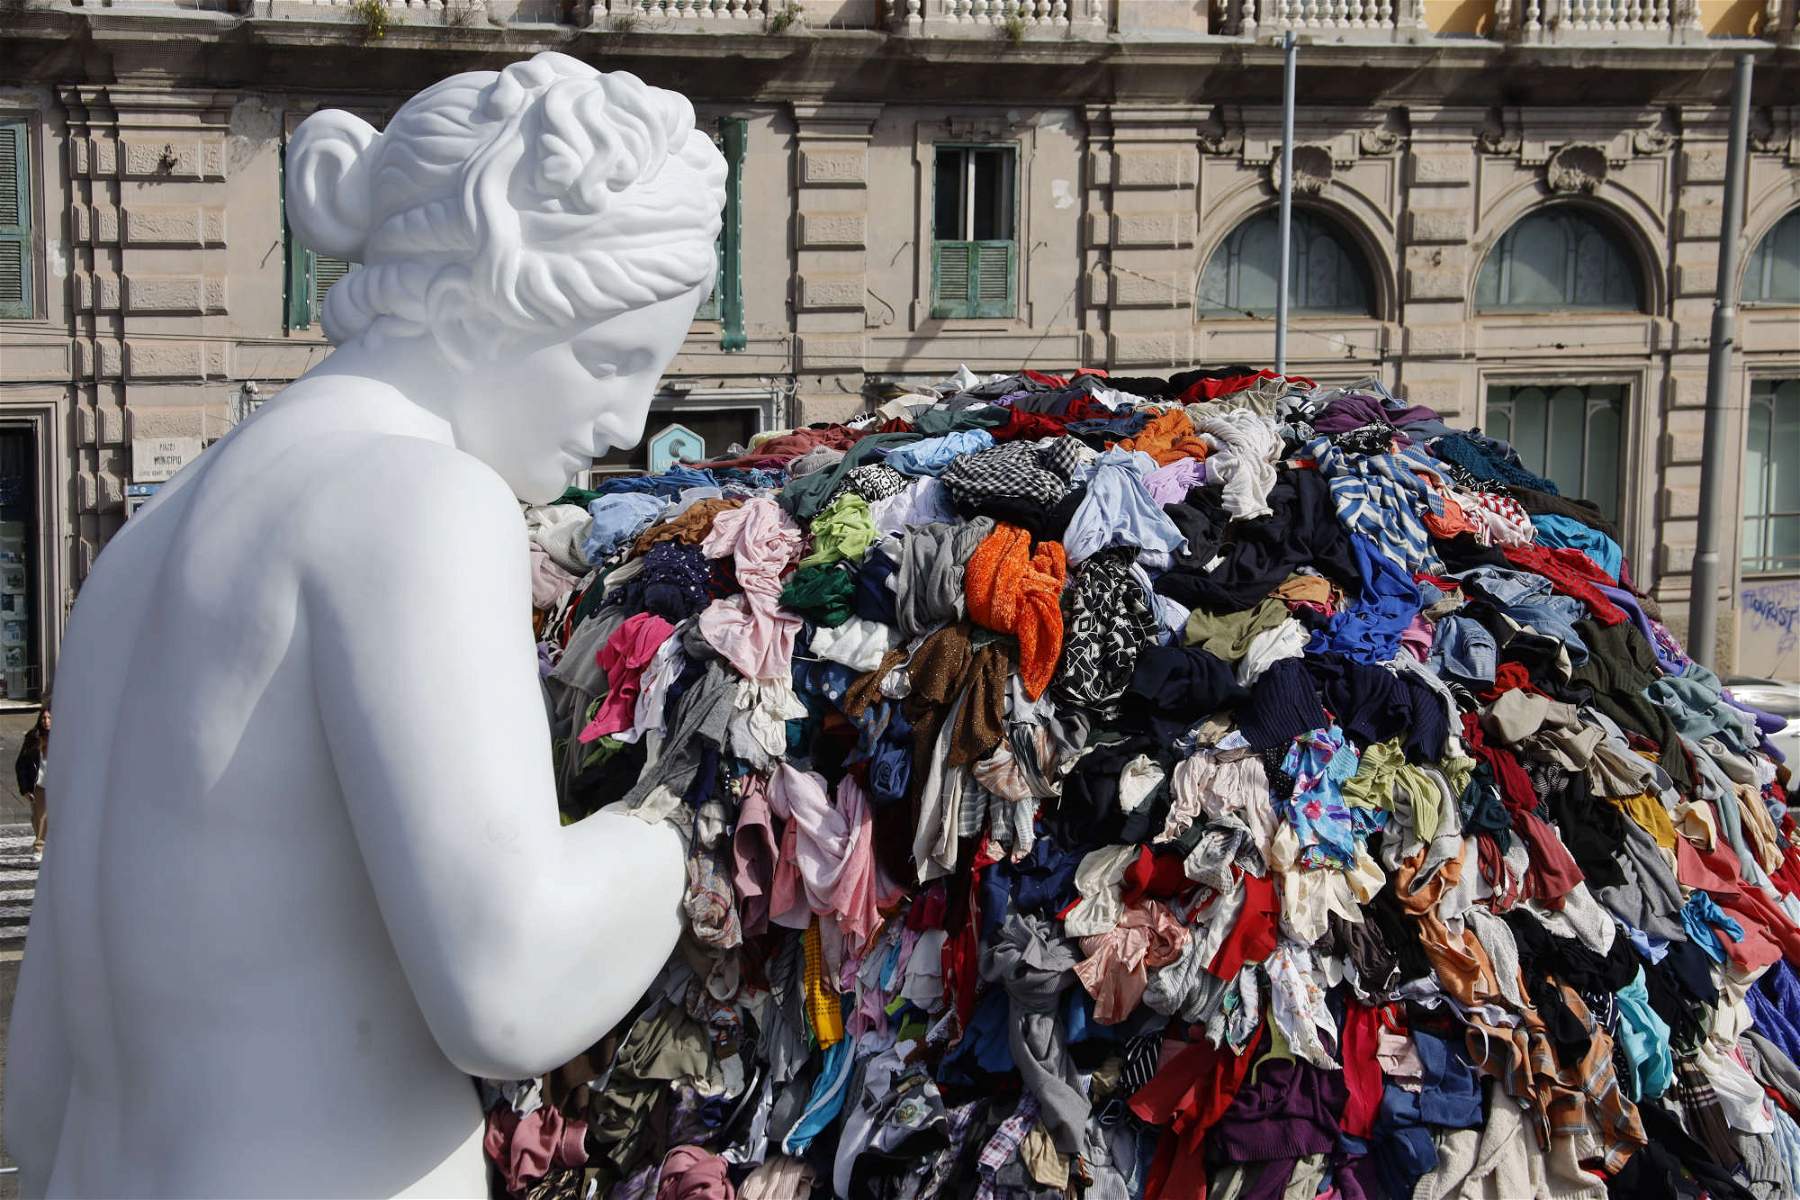 Naples, Pistoletto's new Venus of rags unveiled: reconstructed at artist's expense